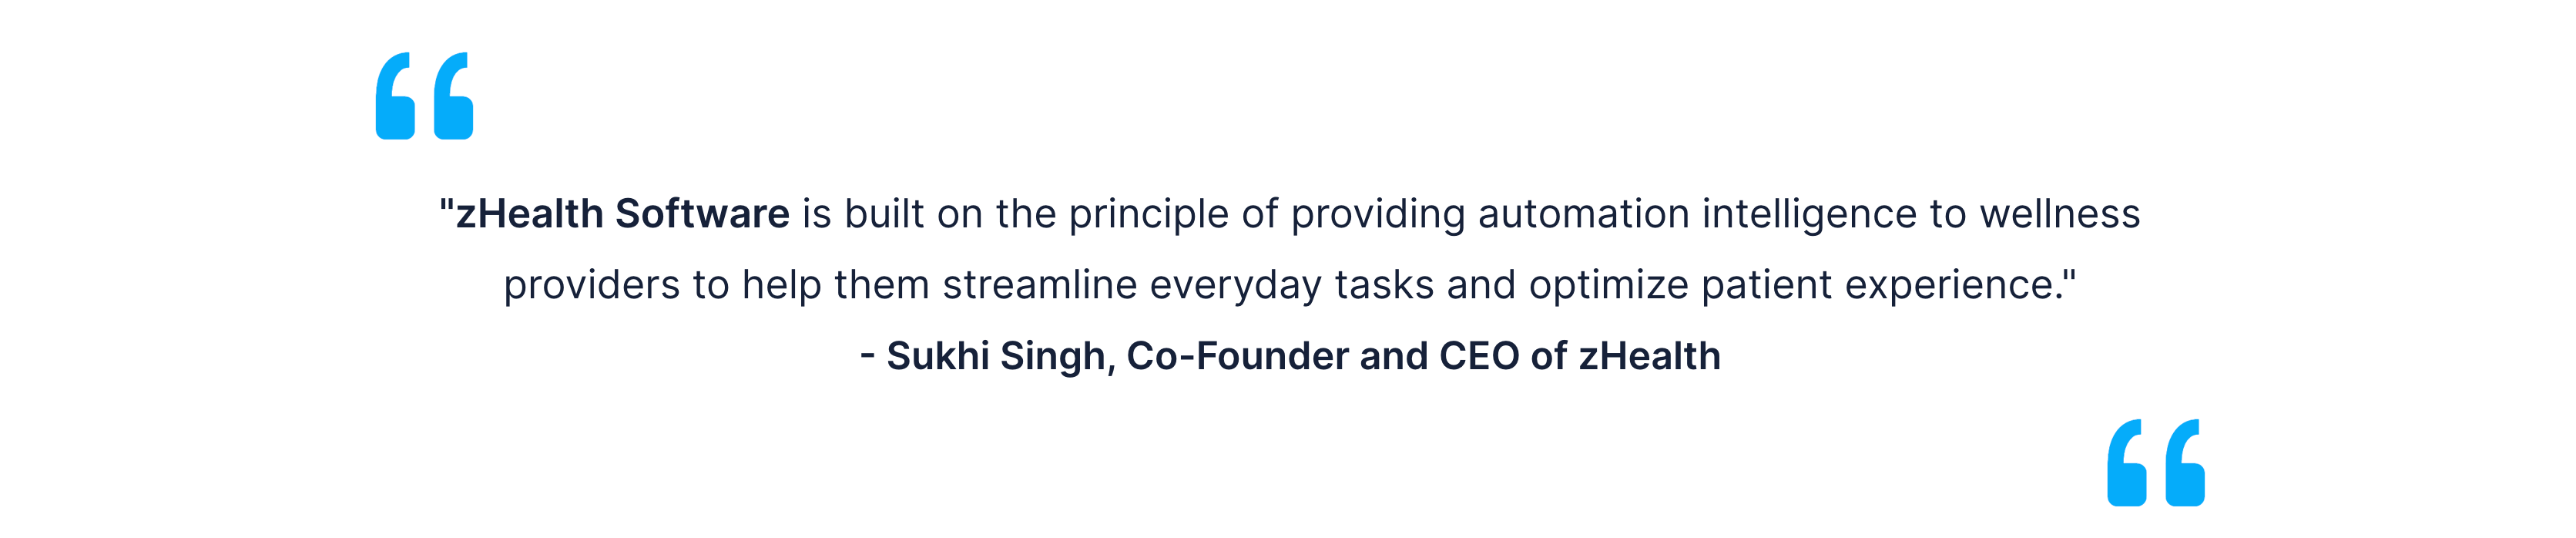 Sukhi Singh Quote for zHealth